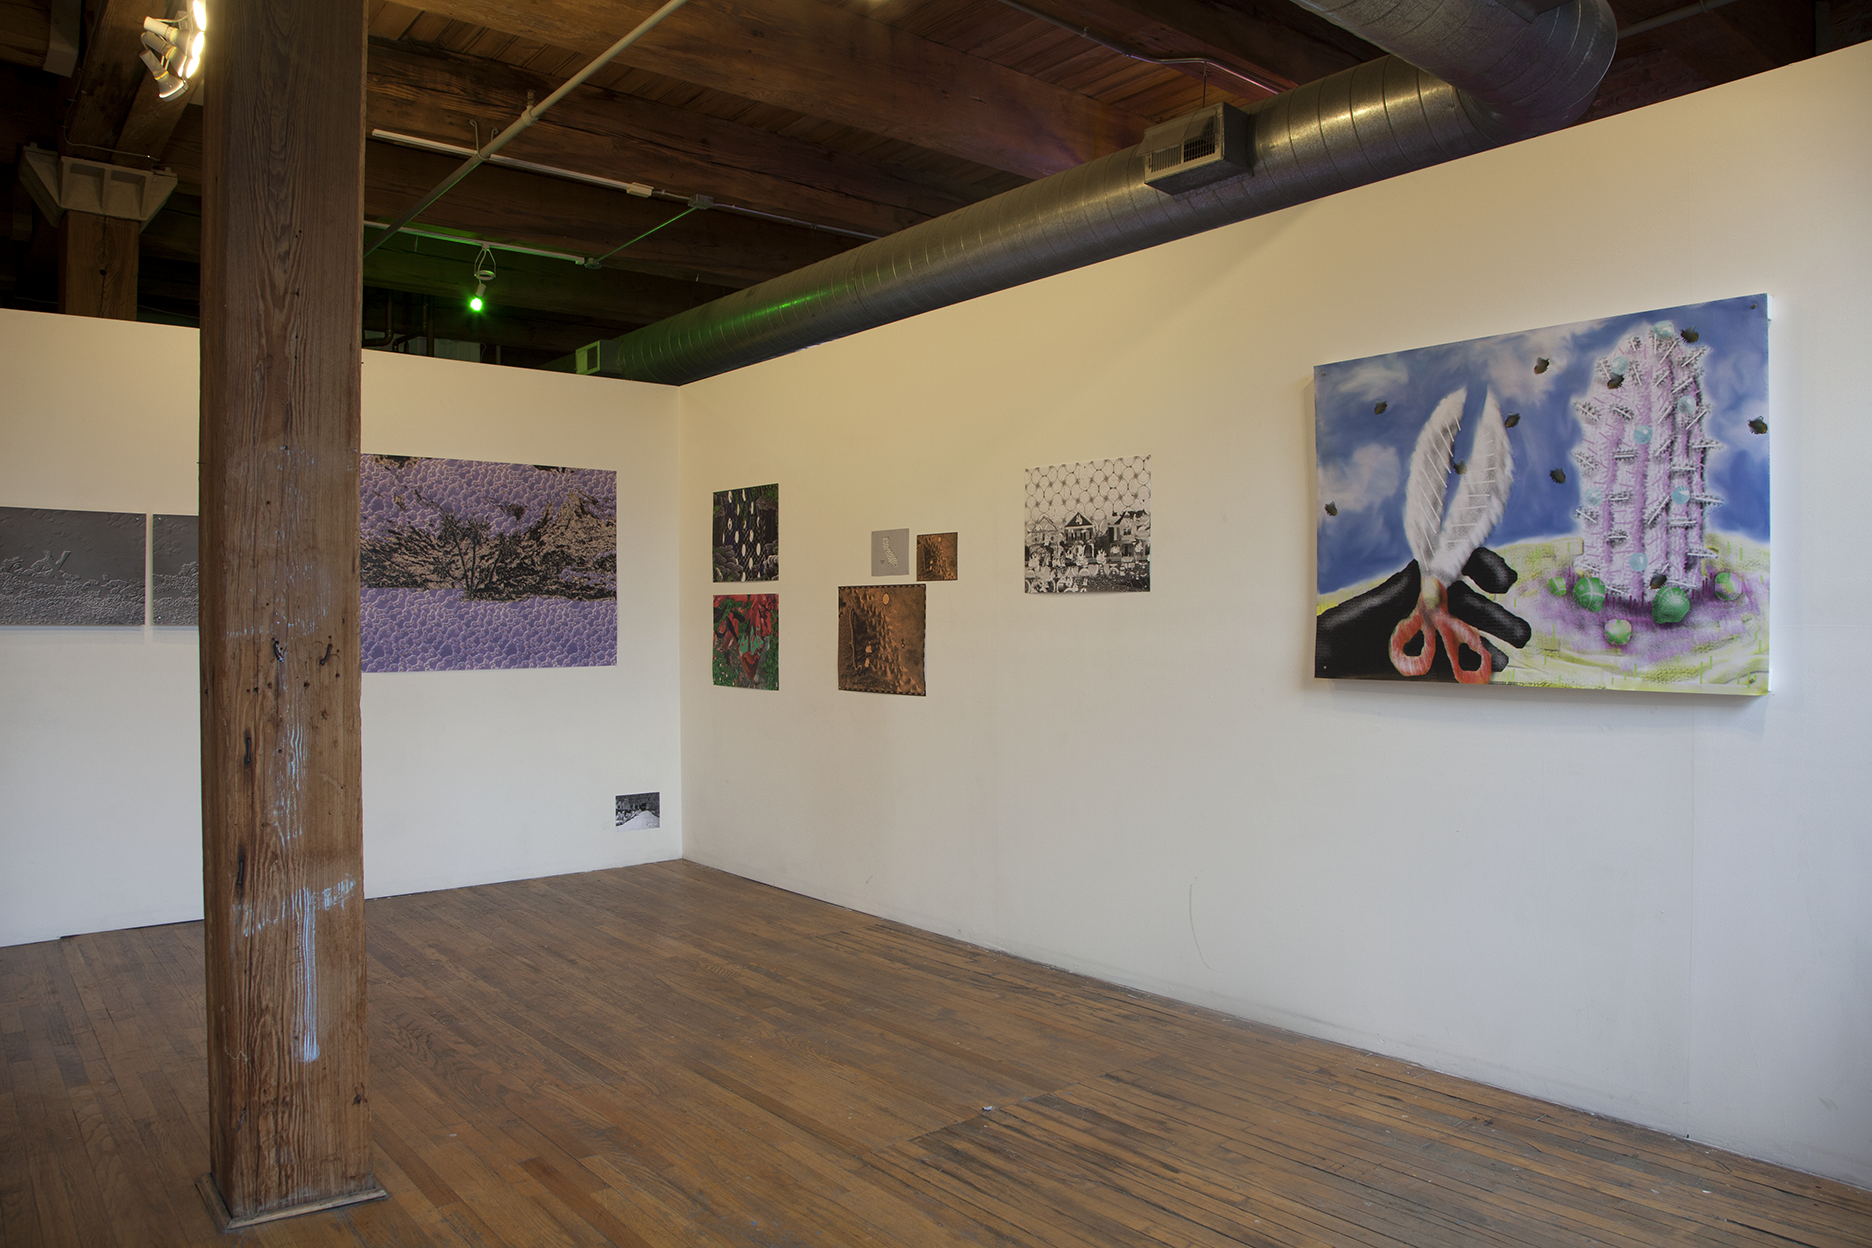 Installation view of eleven large scale prints hung on white walls